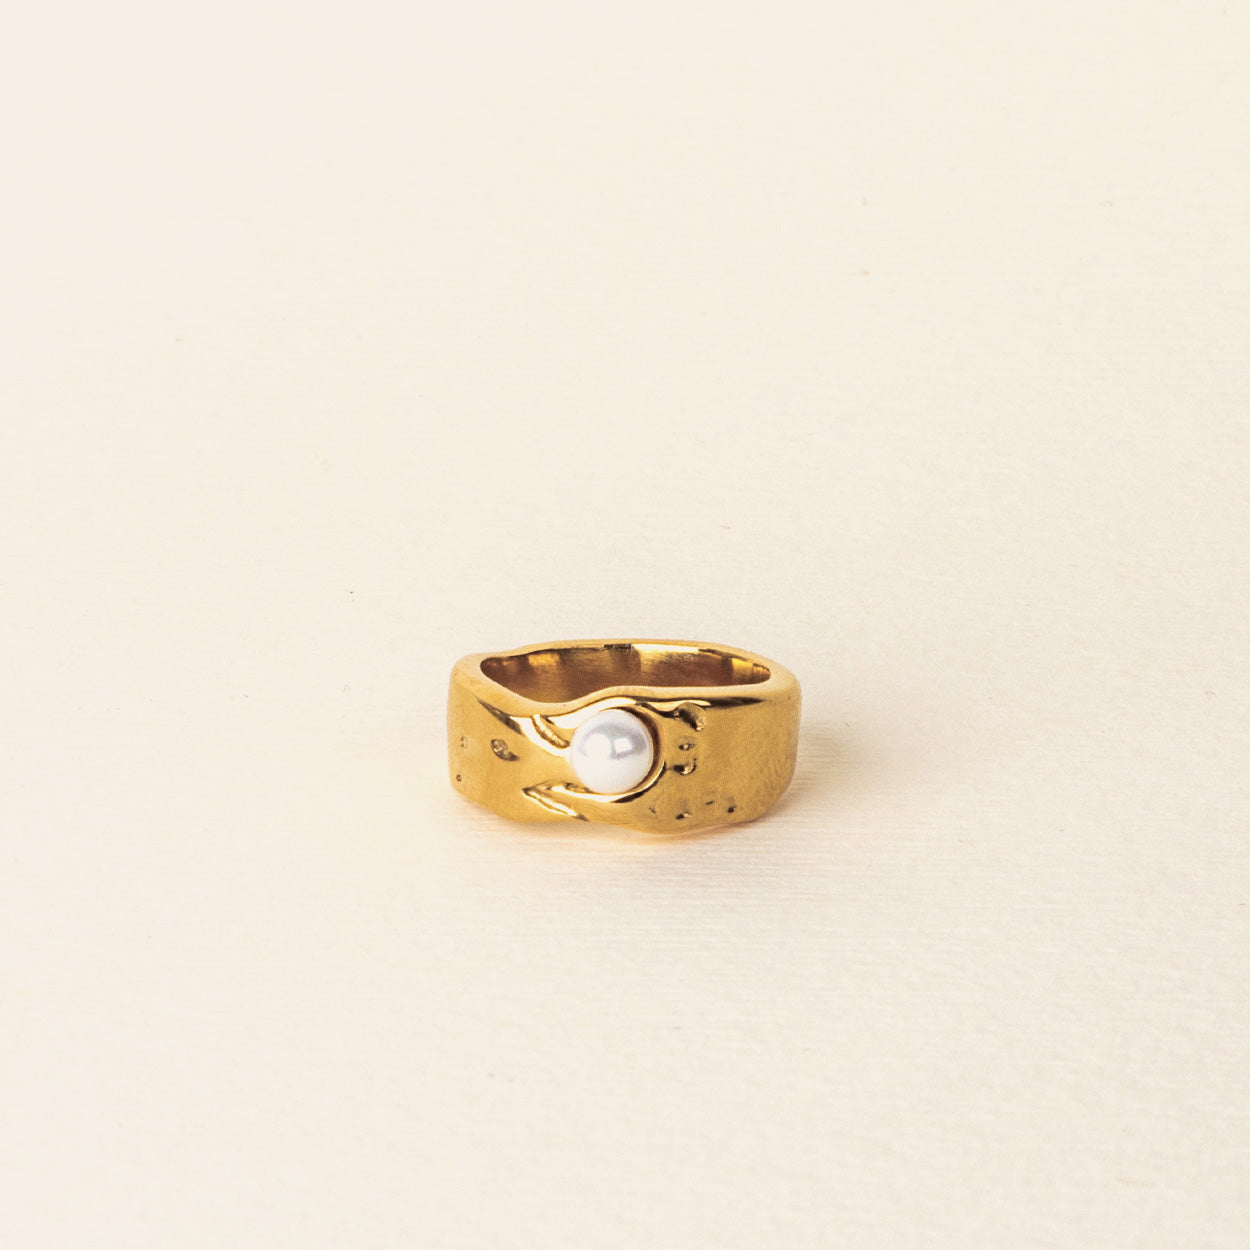 Image of the Madelyn Ring is designed with 18K Gold Plated over Stainless Steel, making it Non-Tarnish and Water Resistant. Adjustment is not possible as the item consists of a single ring.